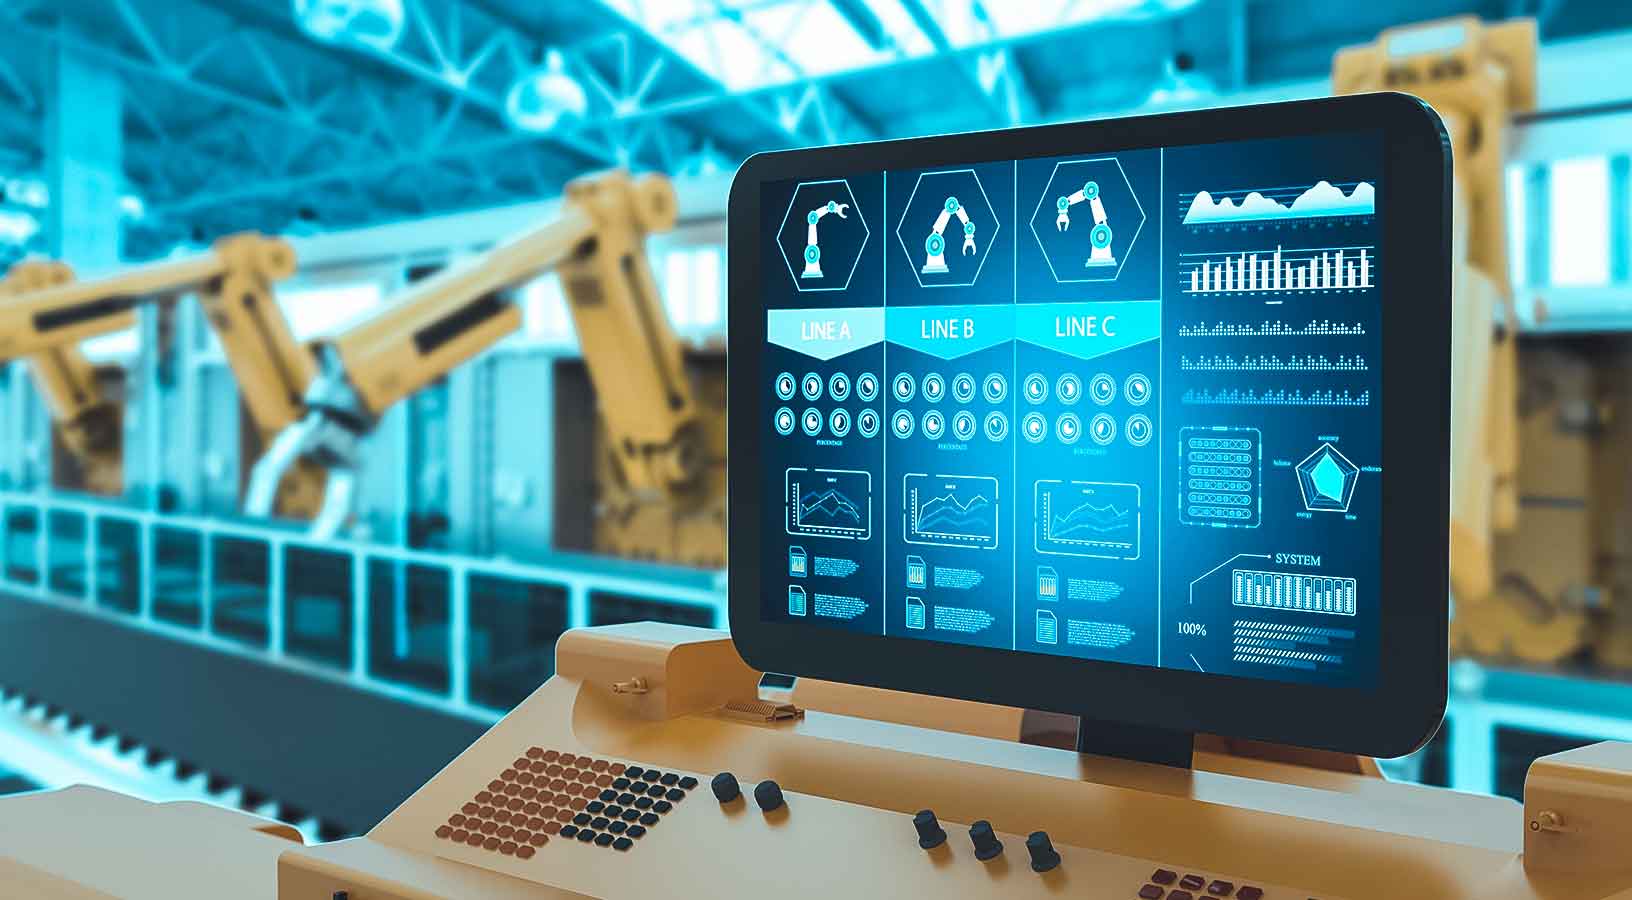 Lineside monitor displaying information about manufacturing process with robots in background 